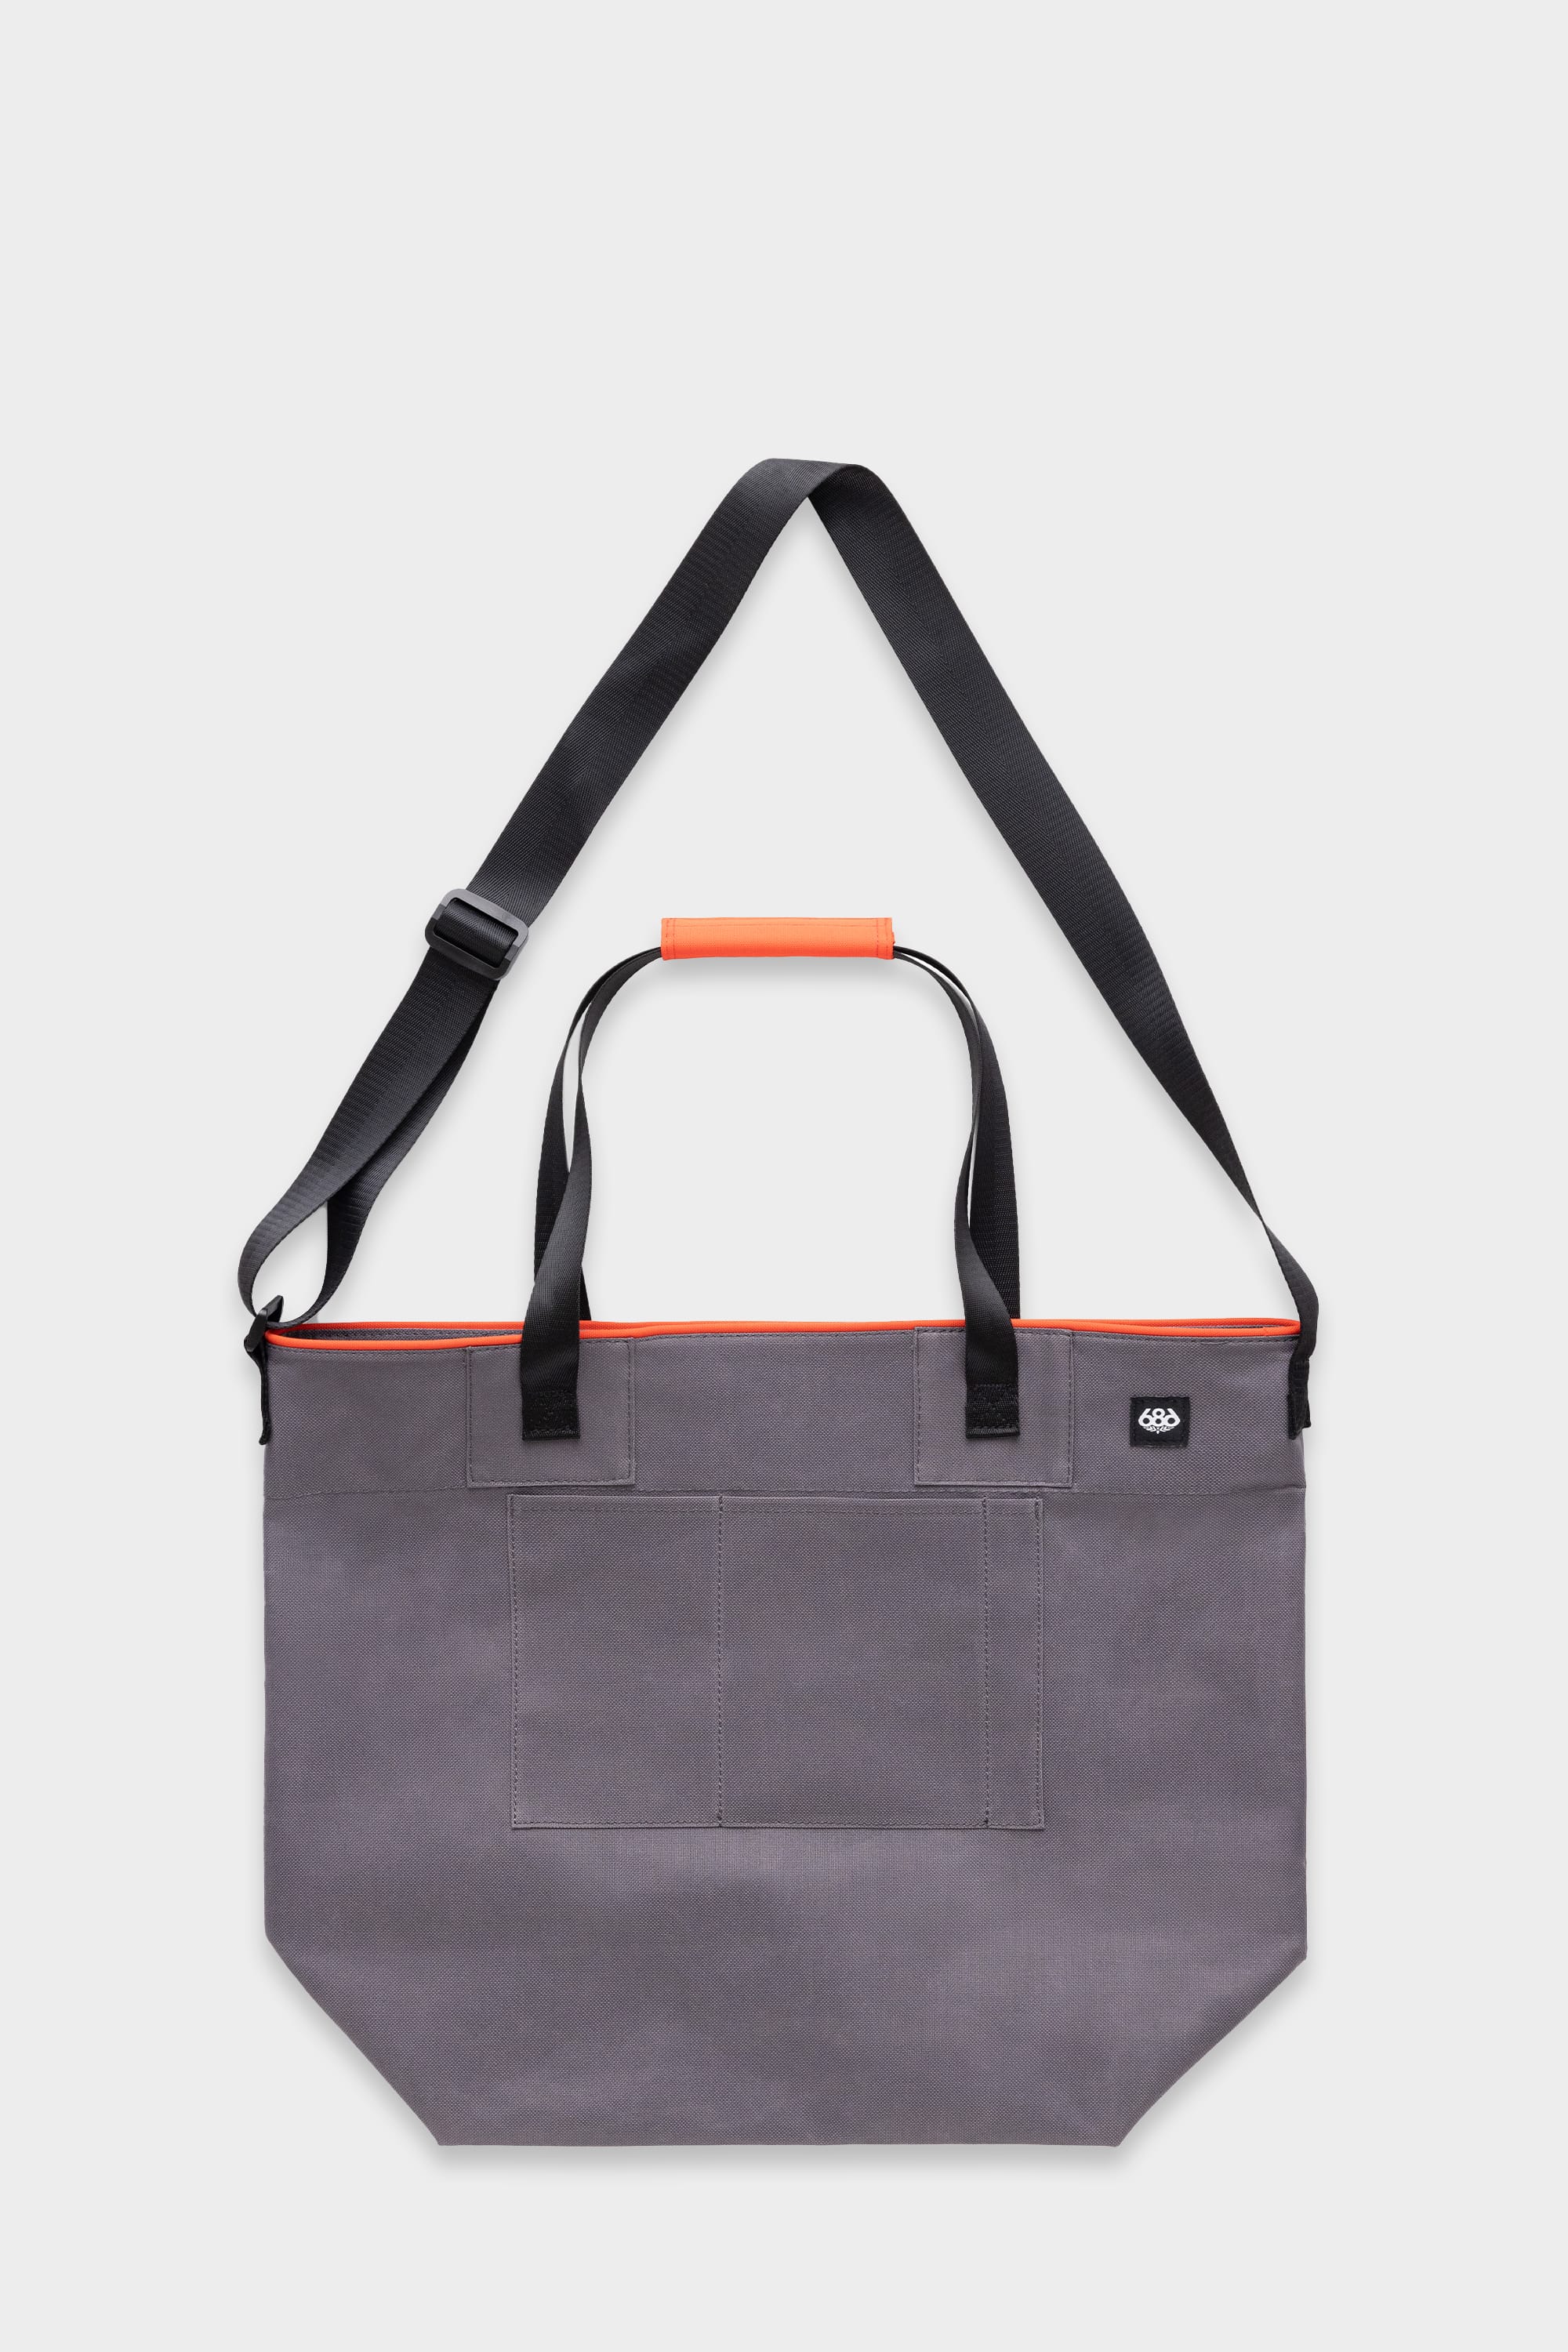 The Get Go Tote — The Get Go